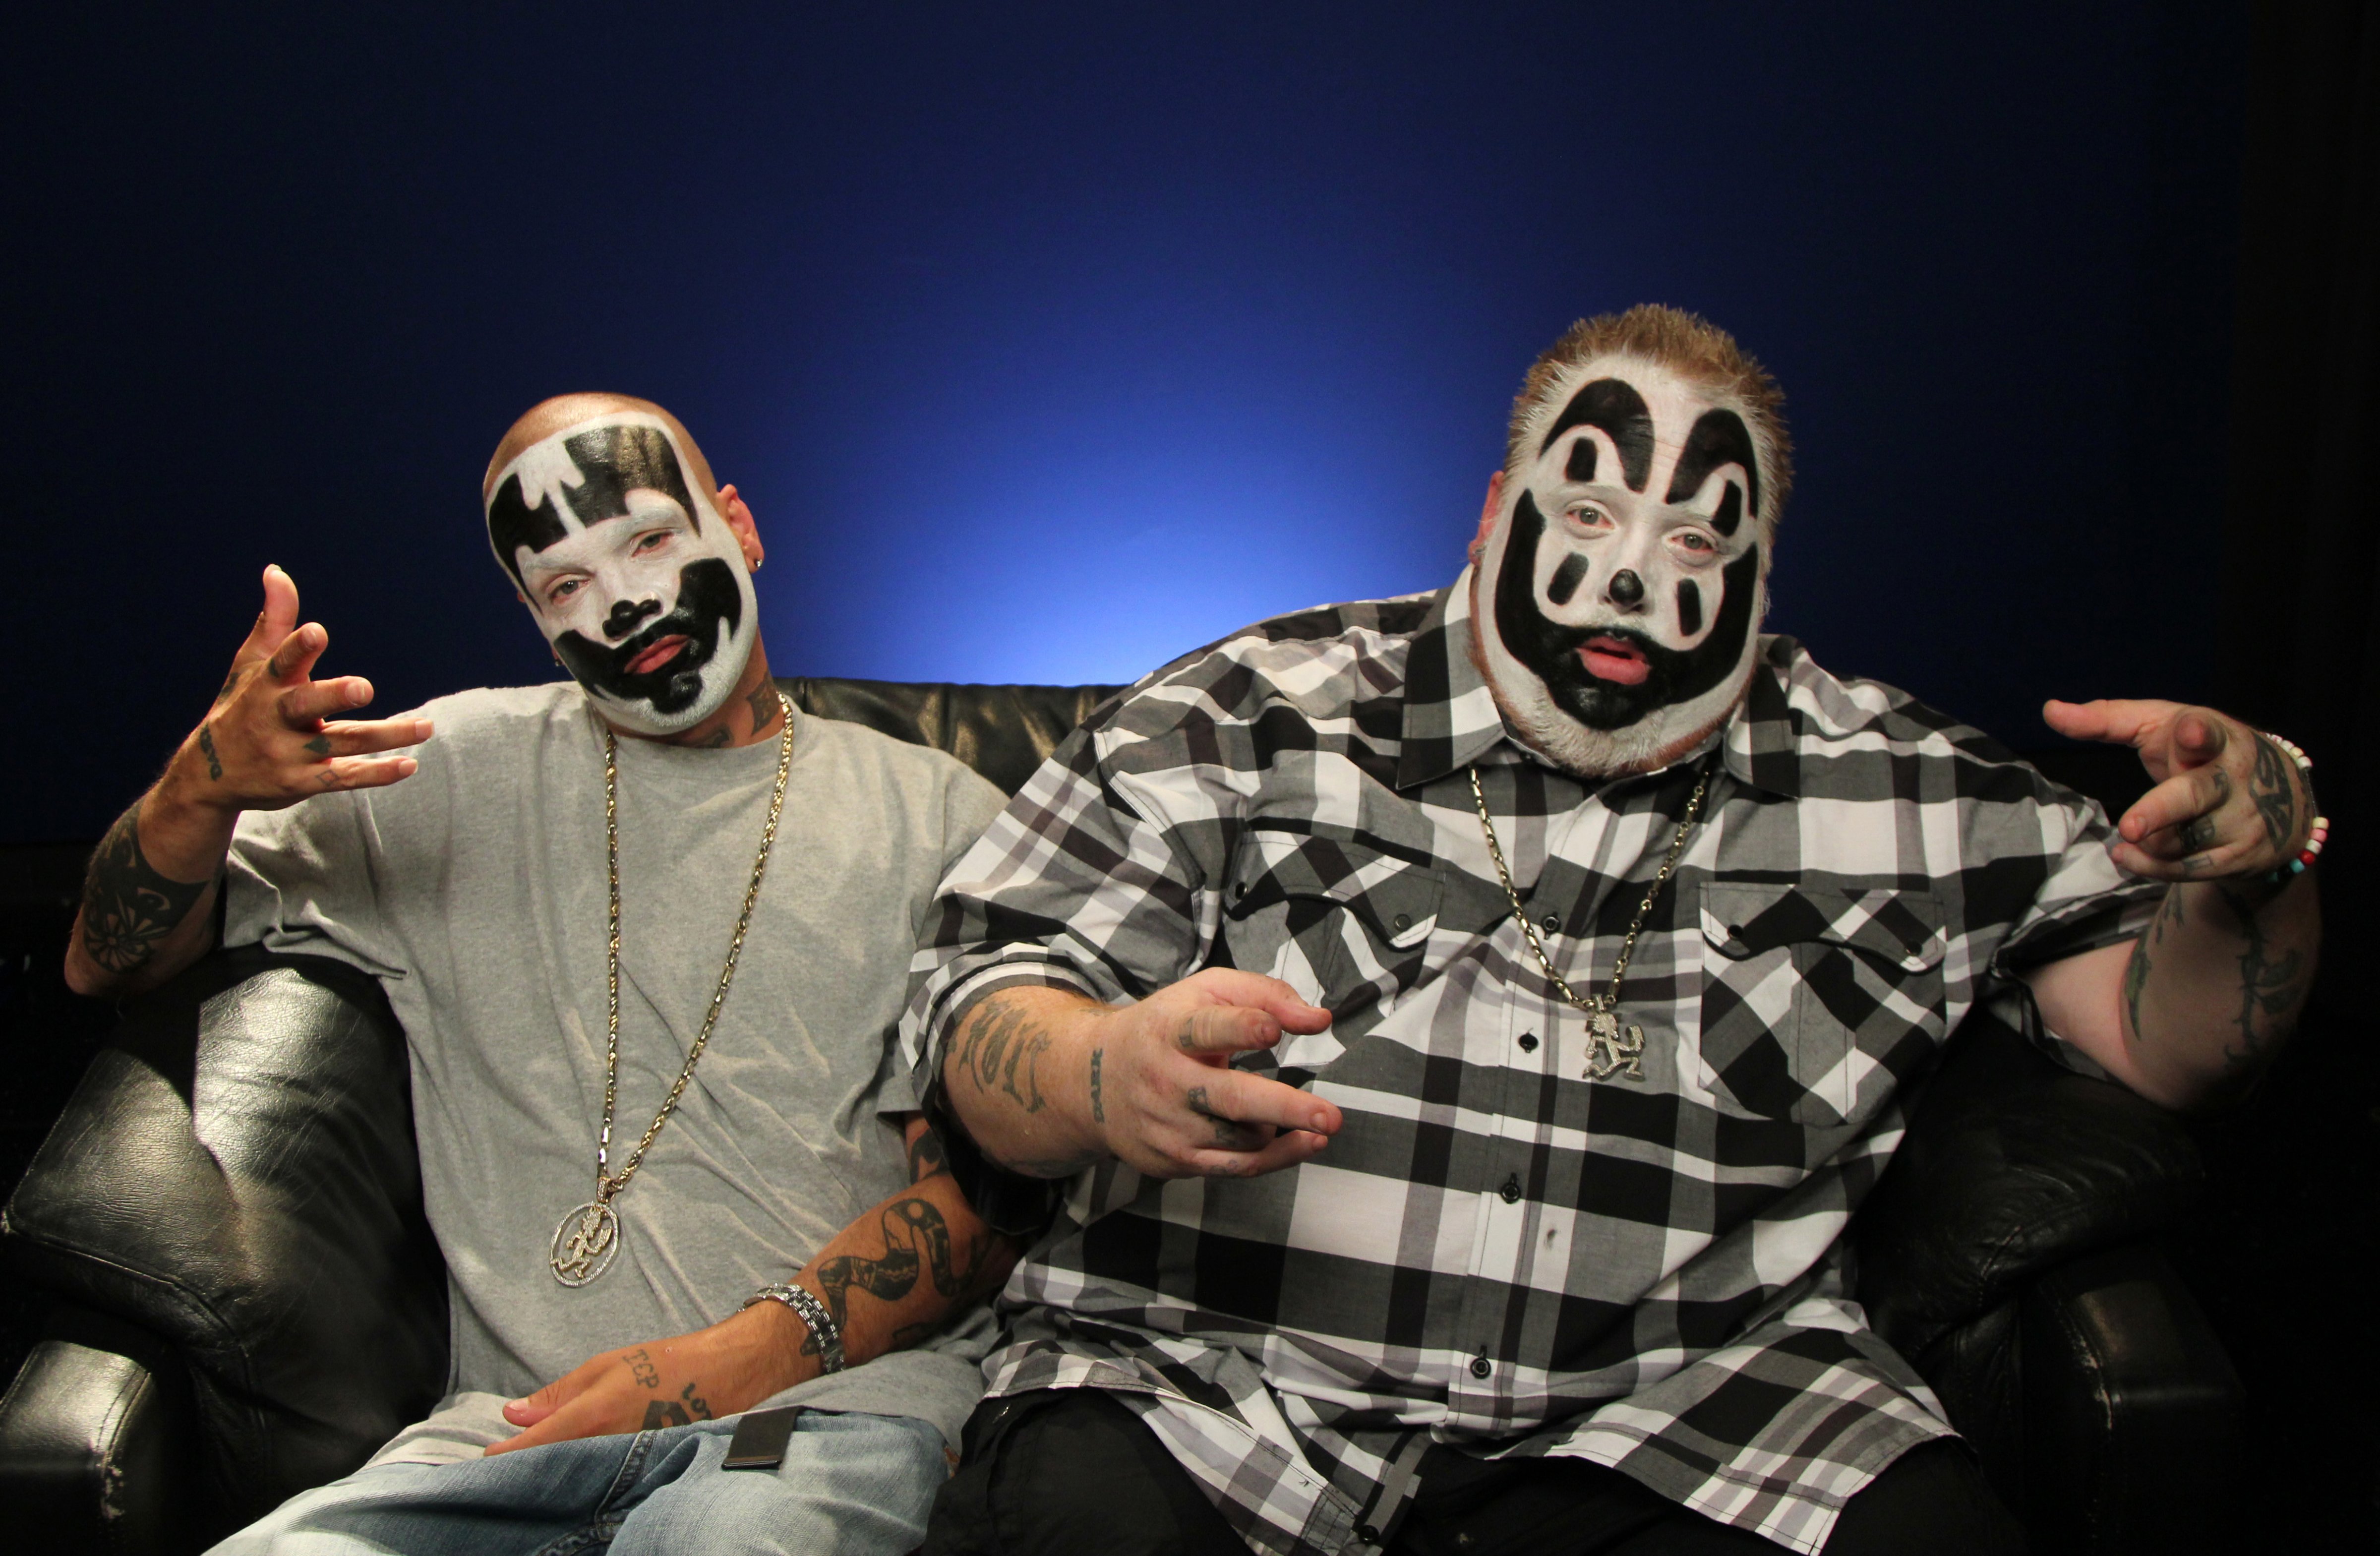 This July 29, 2013 photo shows Joseph Utsler, also known as Shaggy 2 Dope, left, and Joseph Bruce, also known as Violent J, from Insane Clown Posse,  in New York. (John Carucci—AP)